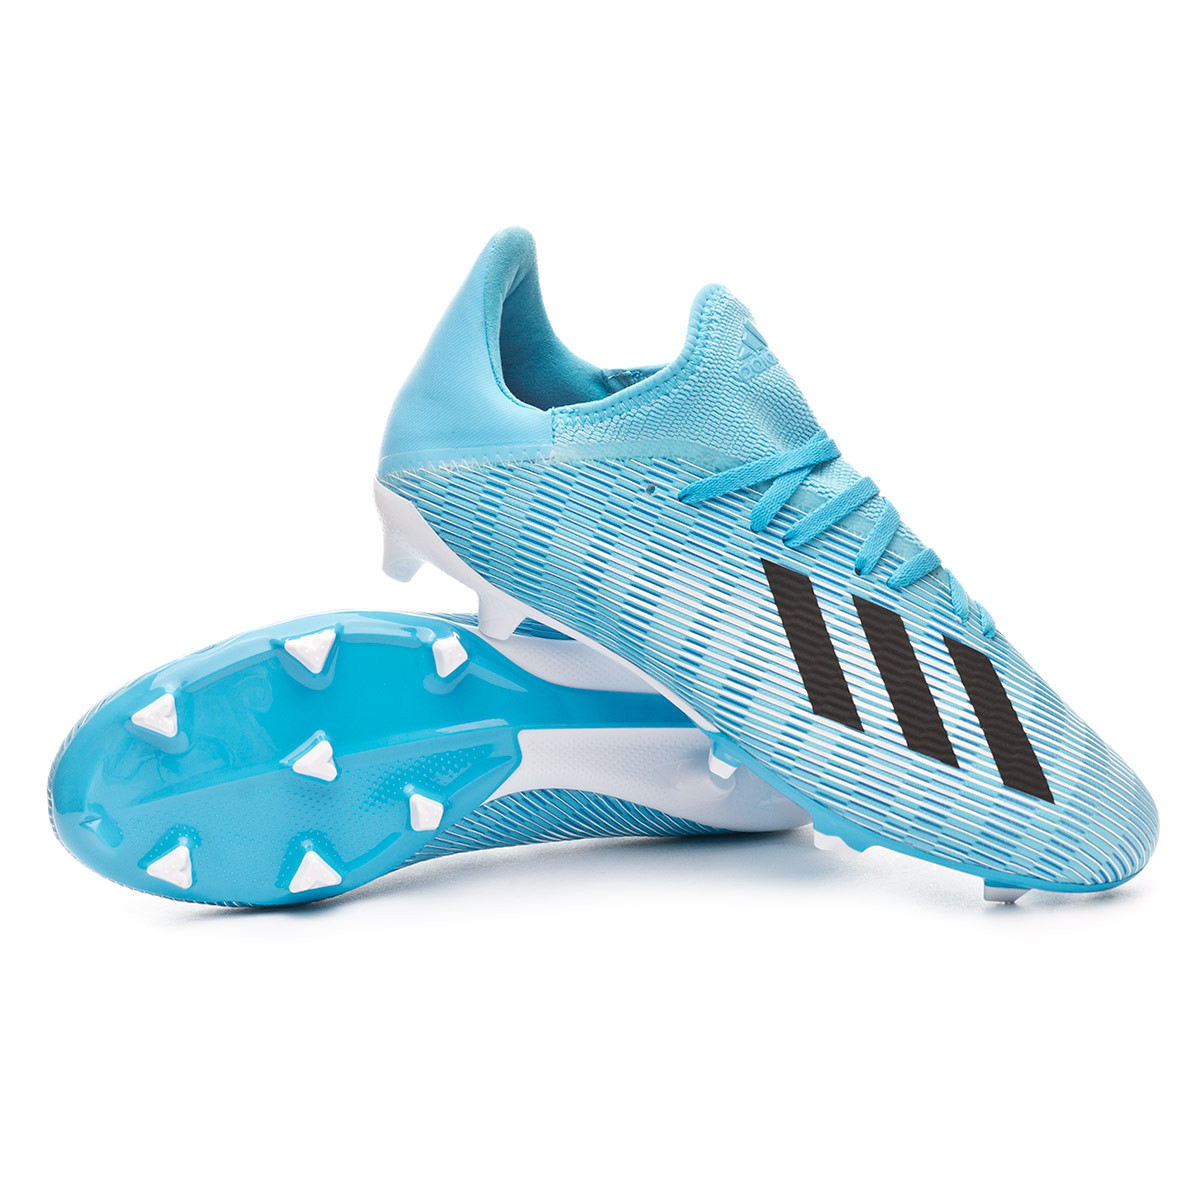 adidas 19.3 firm ground boots